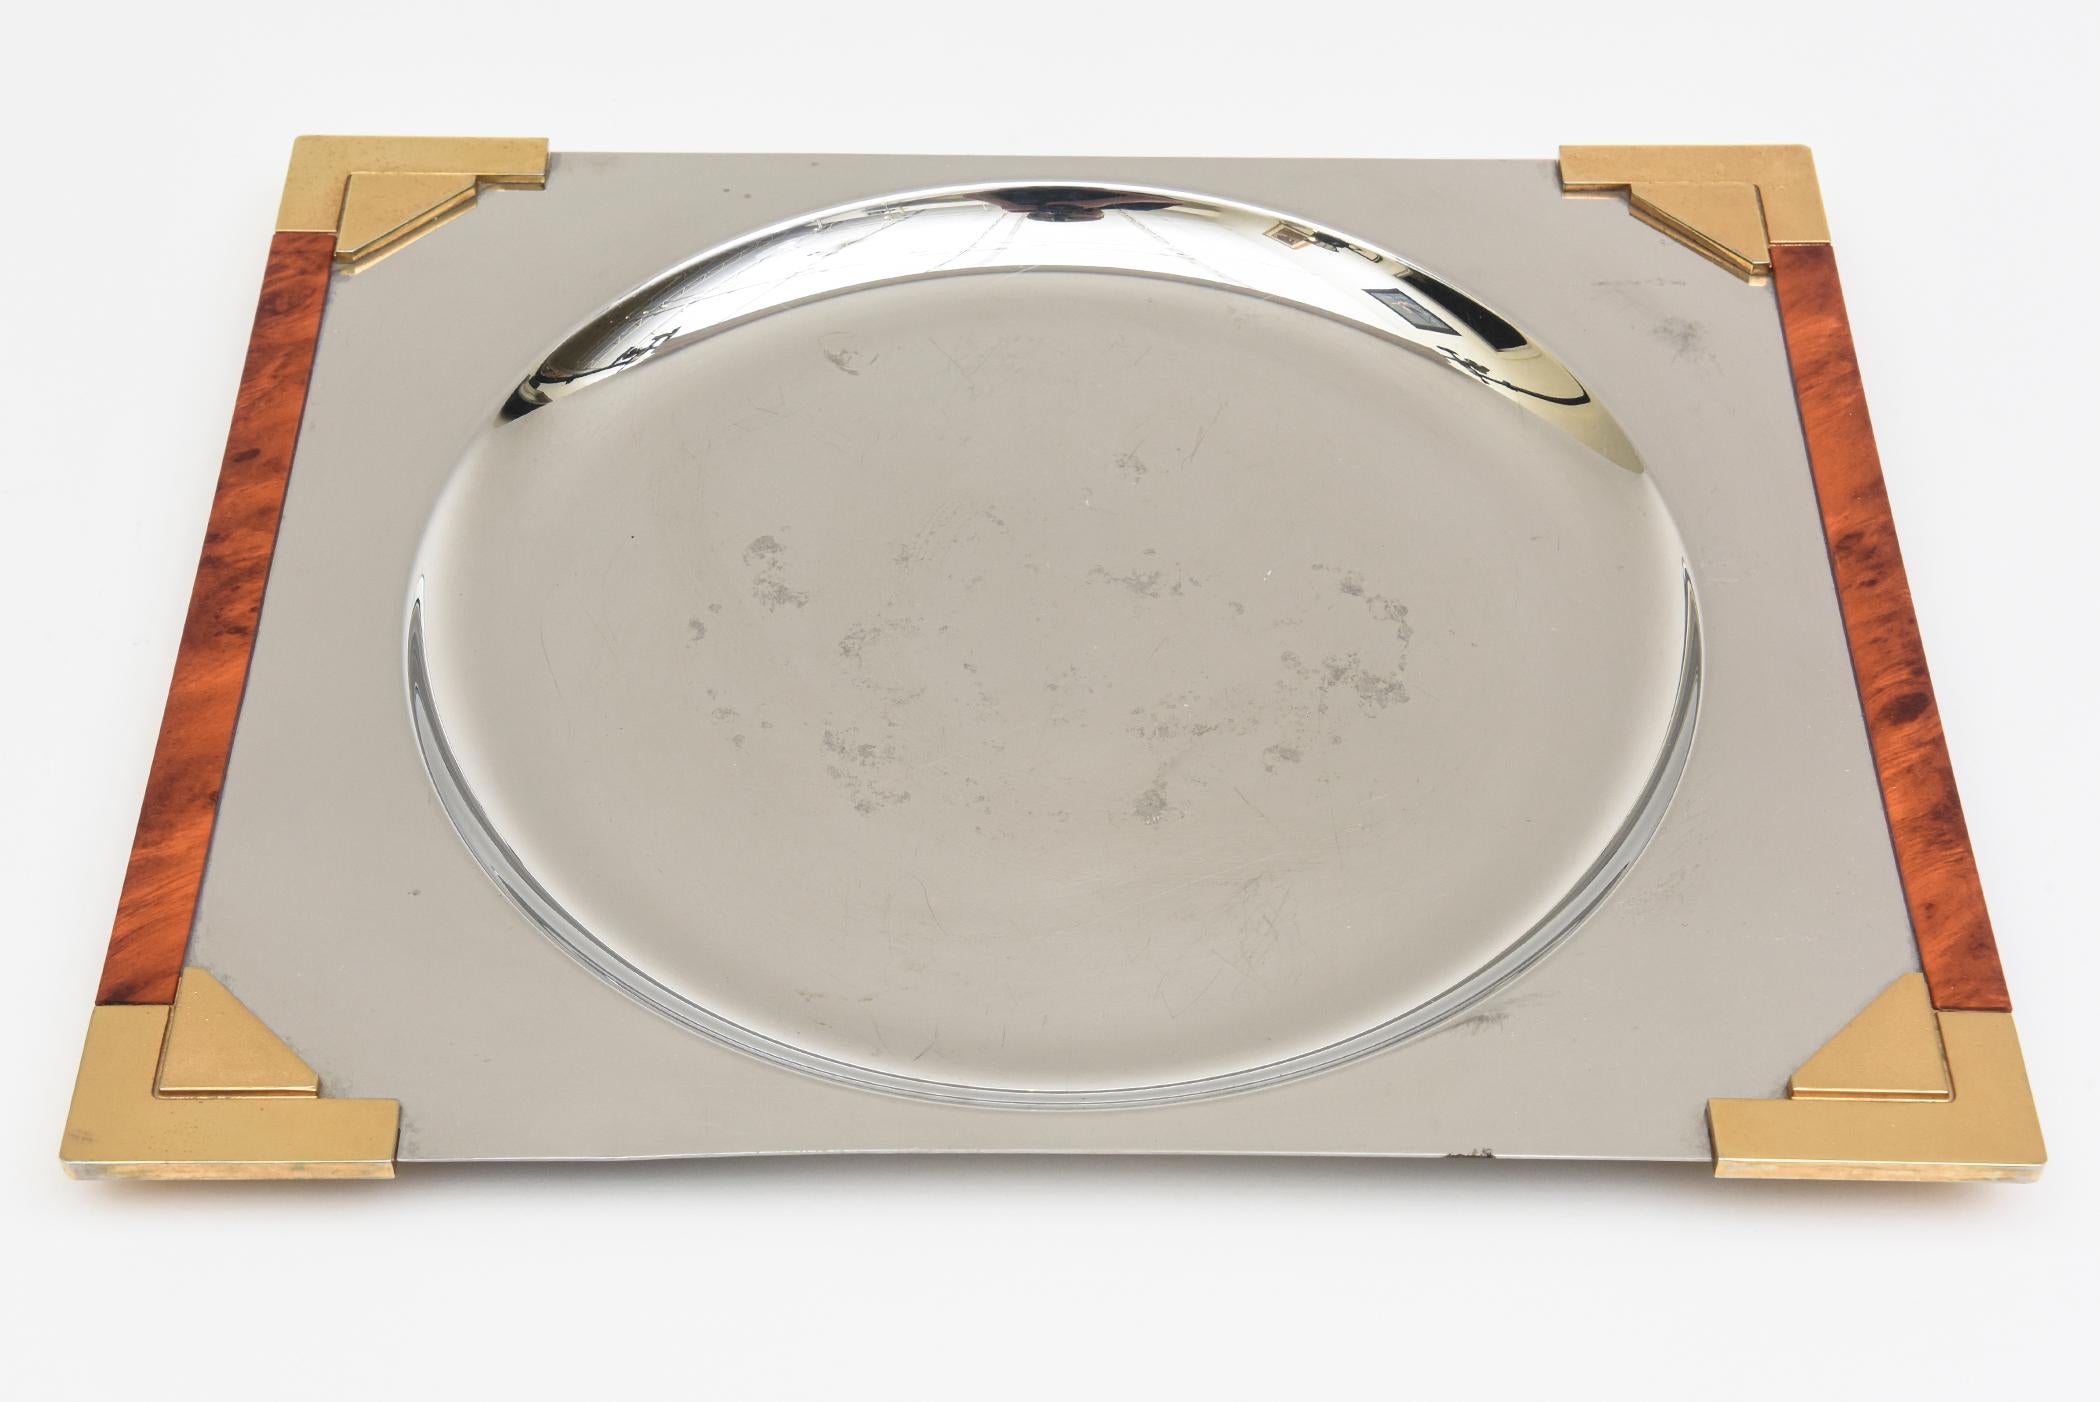 Guy Dugrenne Signé Burled Wood, Gilt, Stainless Tray or Barware French en vente 1